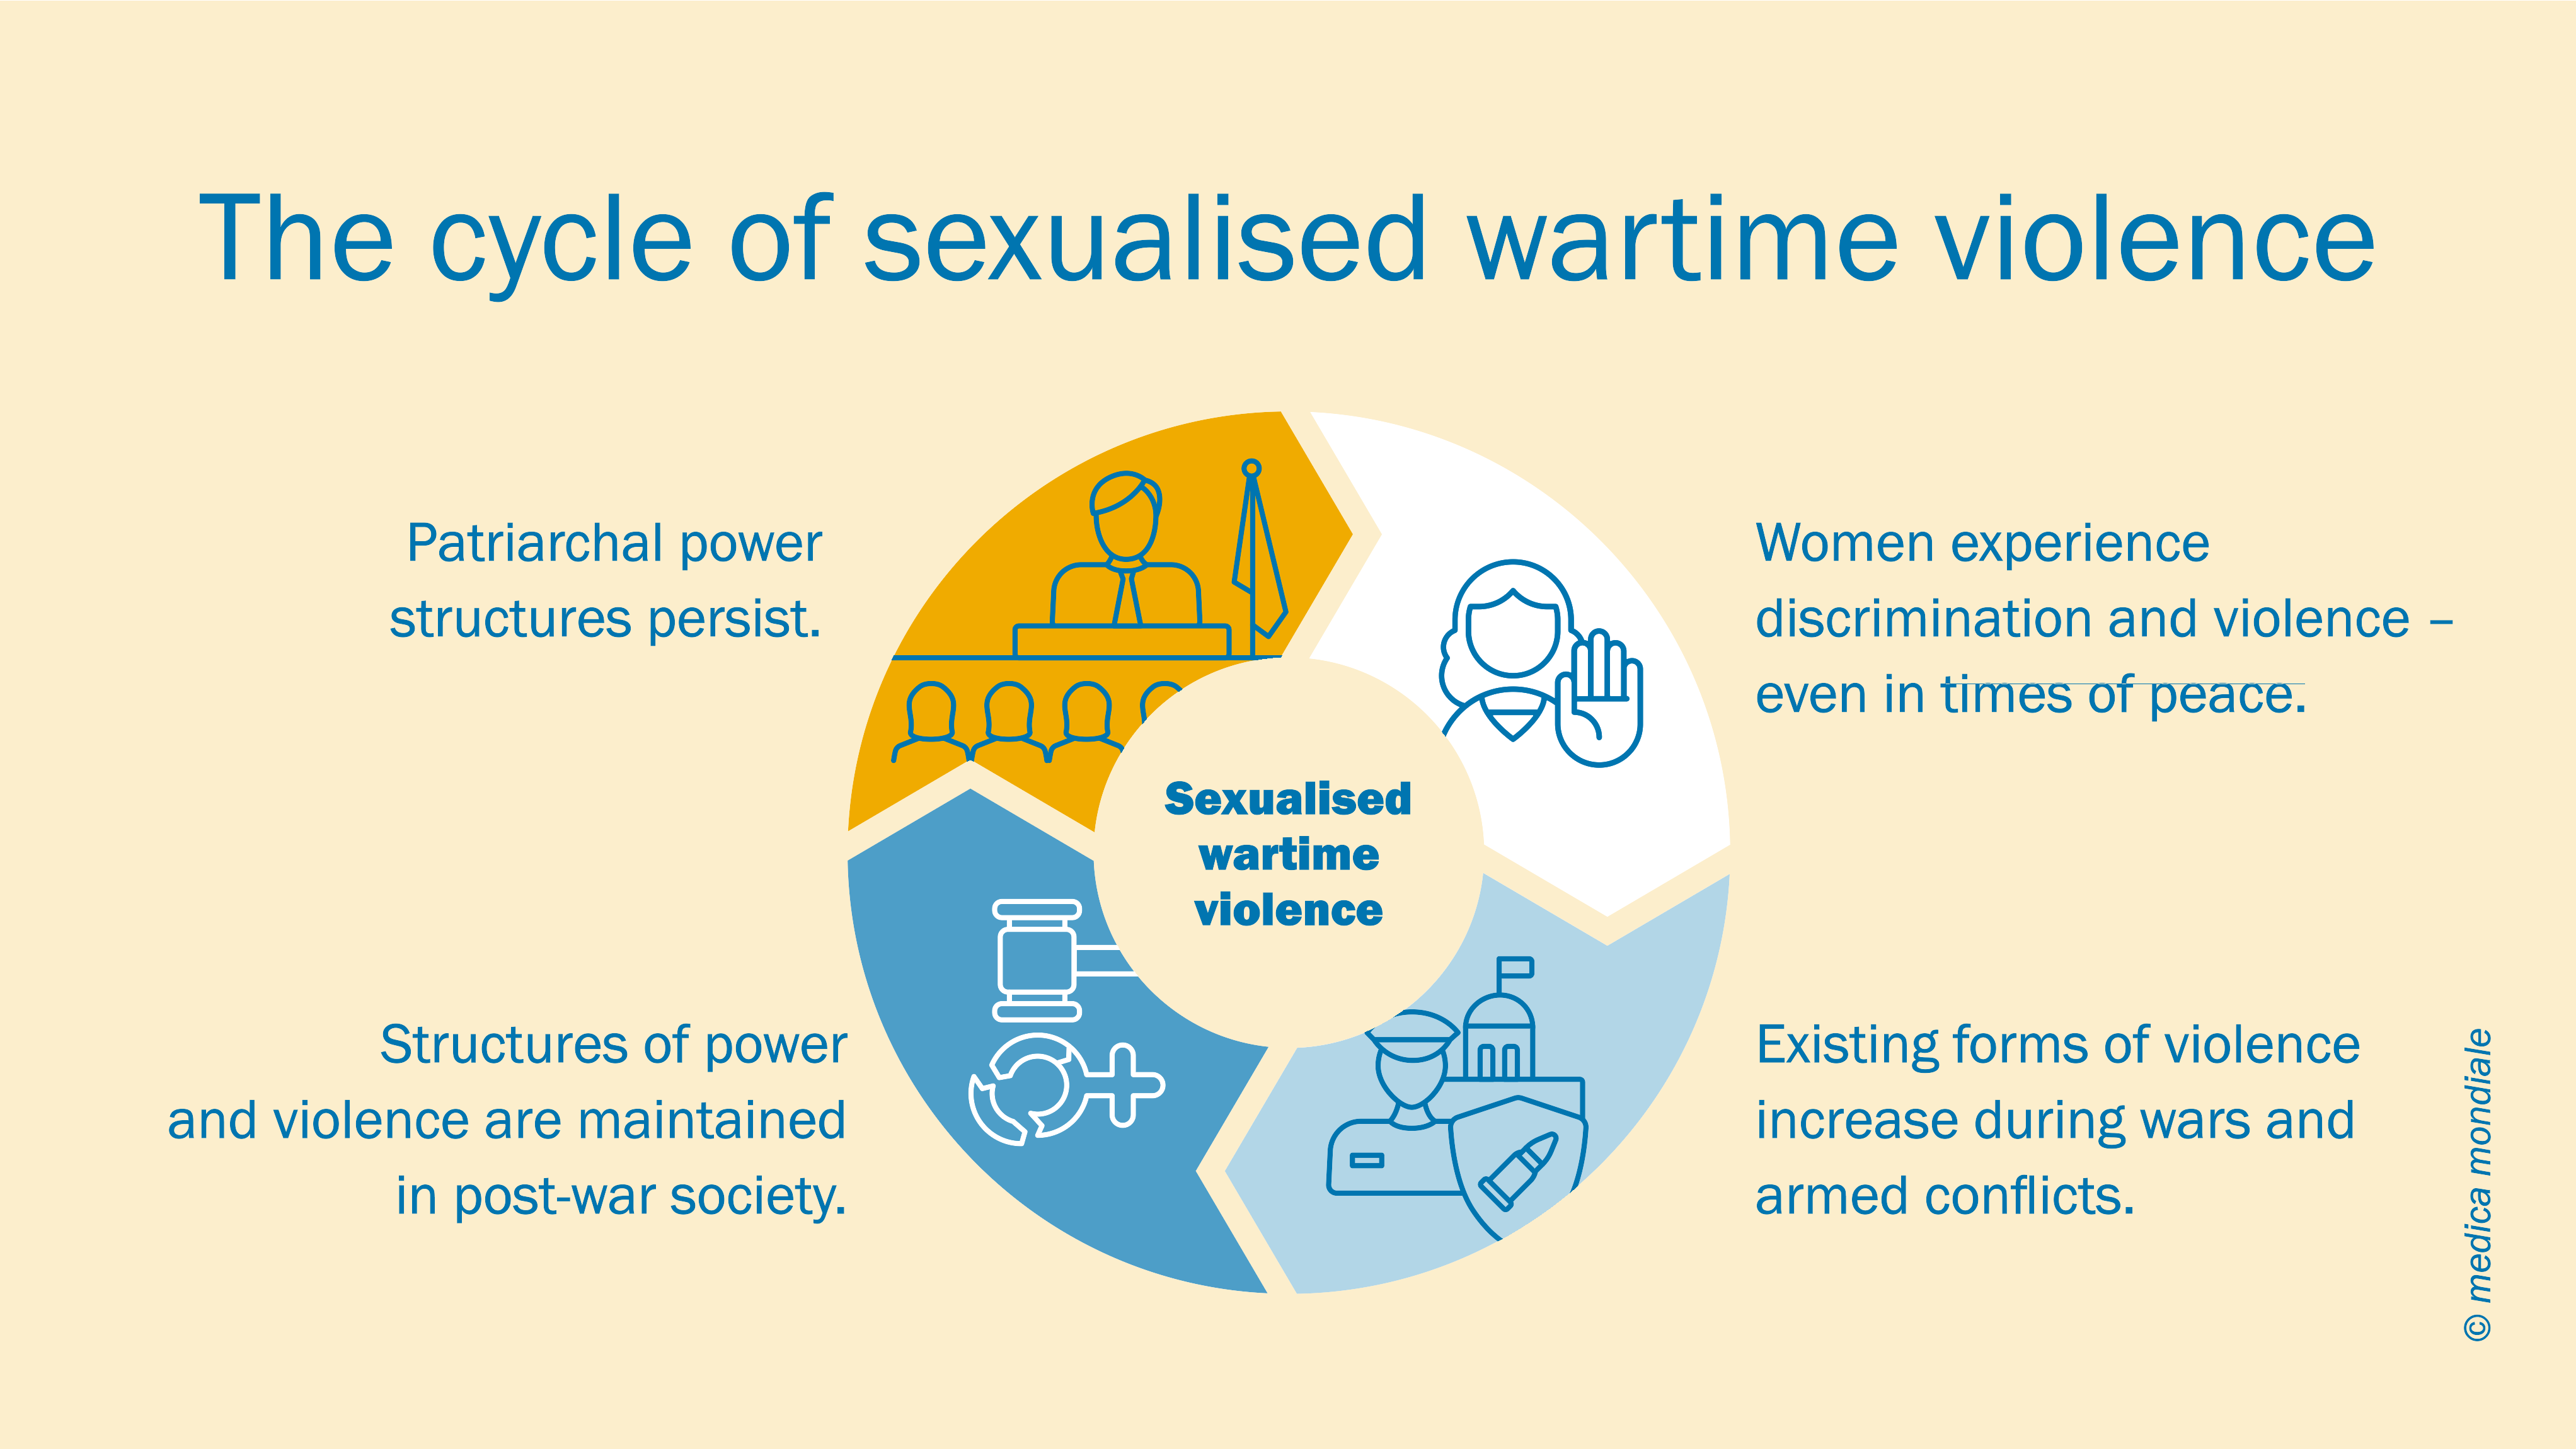 Infographic illustrating the cycle of sexualised war violence.